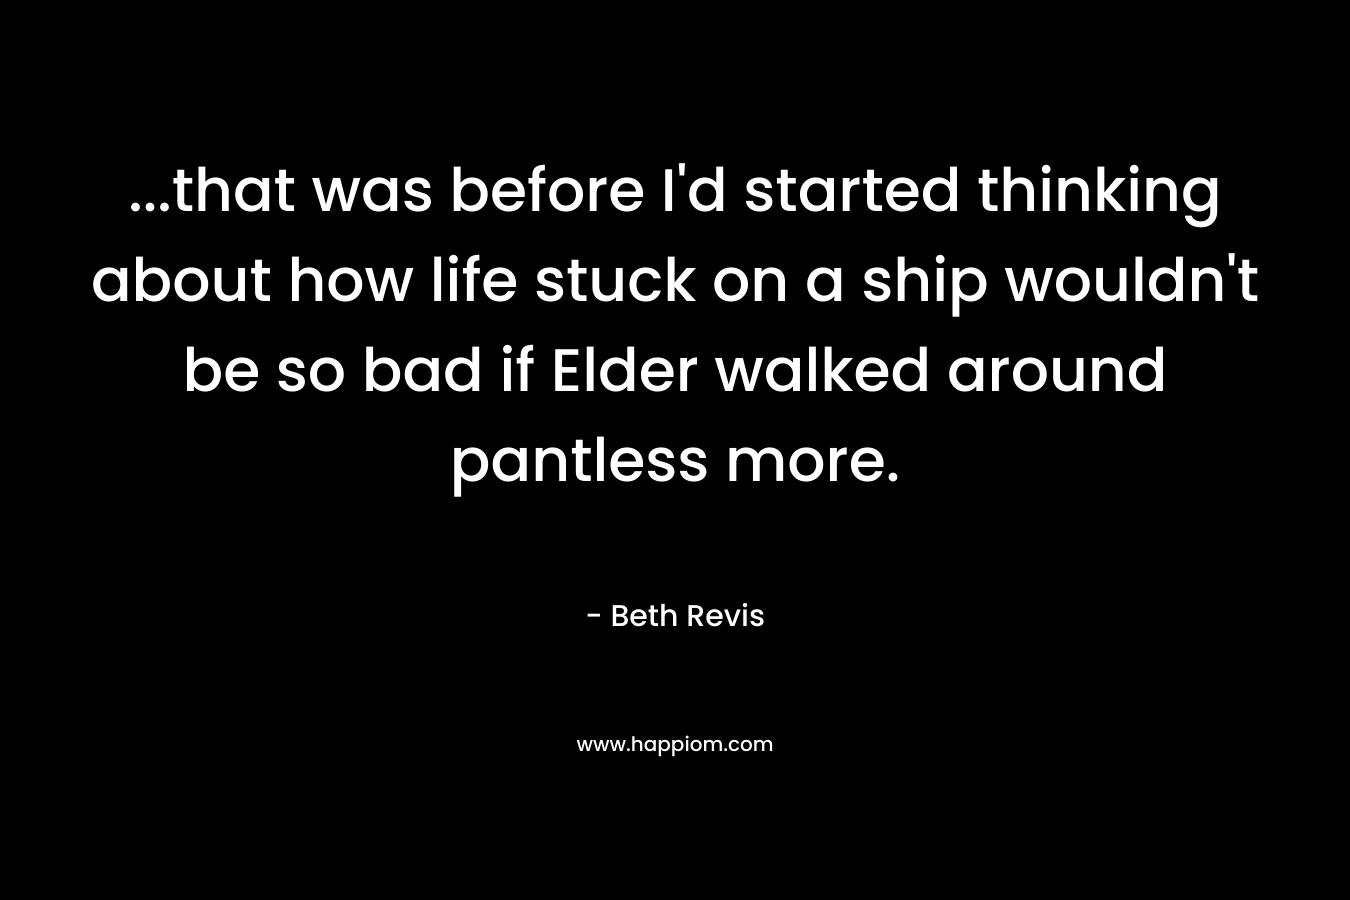 …that was before I’d started thinking about how life stuck on a ship wouldn’t be so bad if Elder walked around pantless more. – Beth Revis